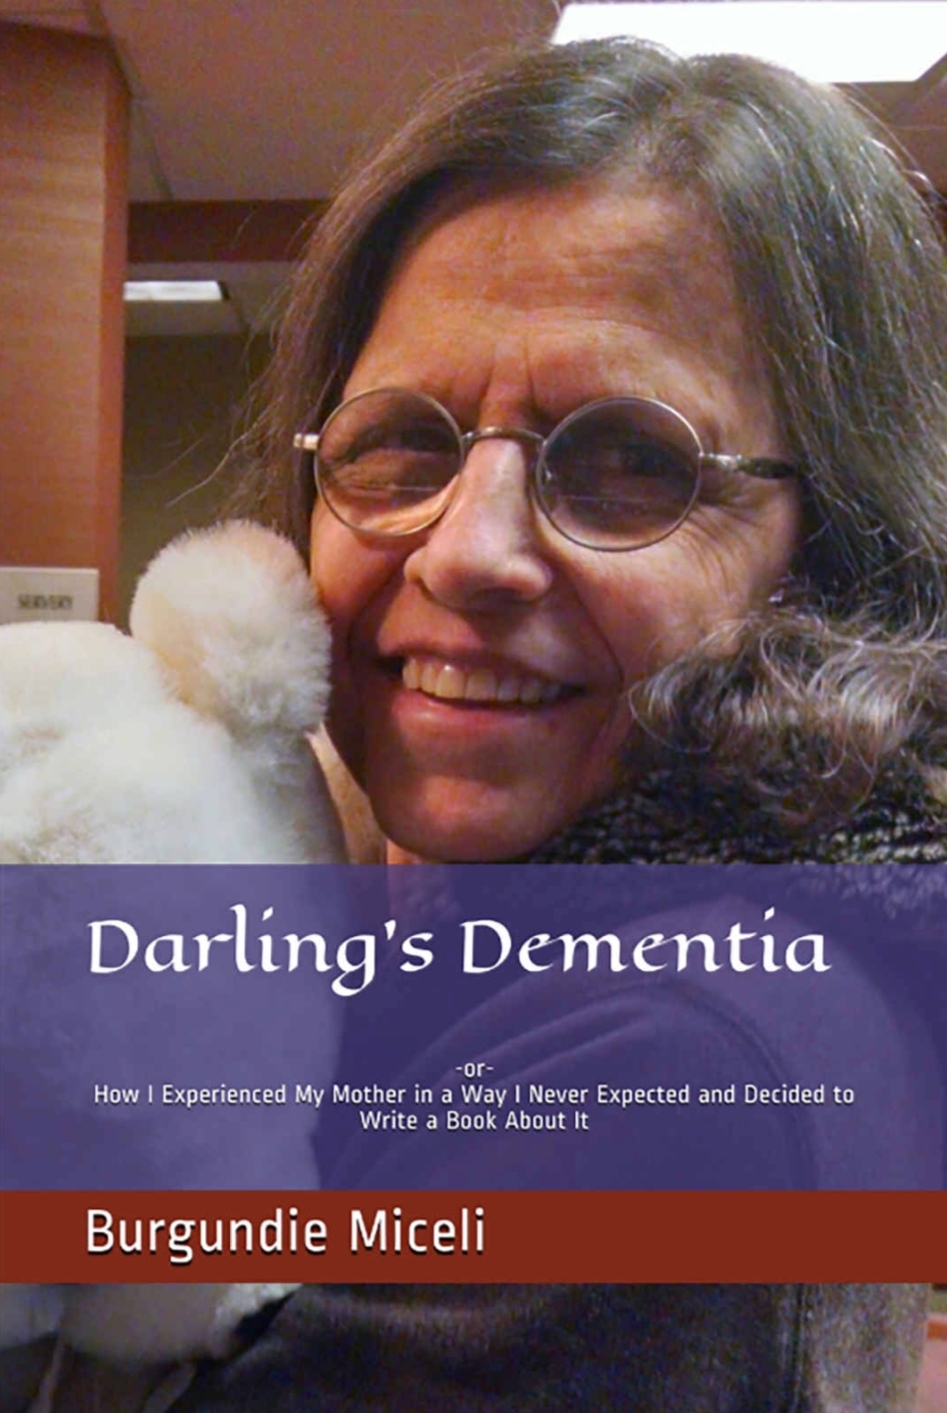 Darling’s Dementia: -or- How I Experienced My Mother in a Way I Never Expected and Decided to Write a Book About It